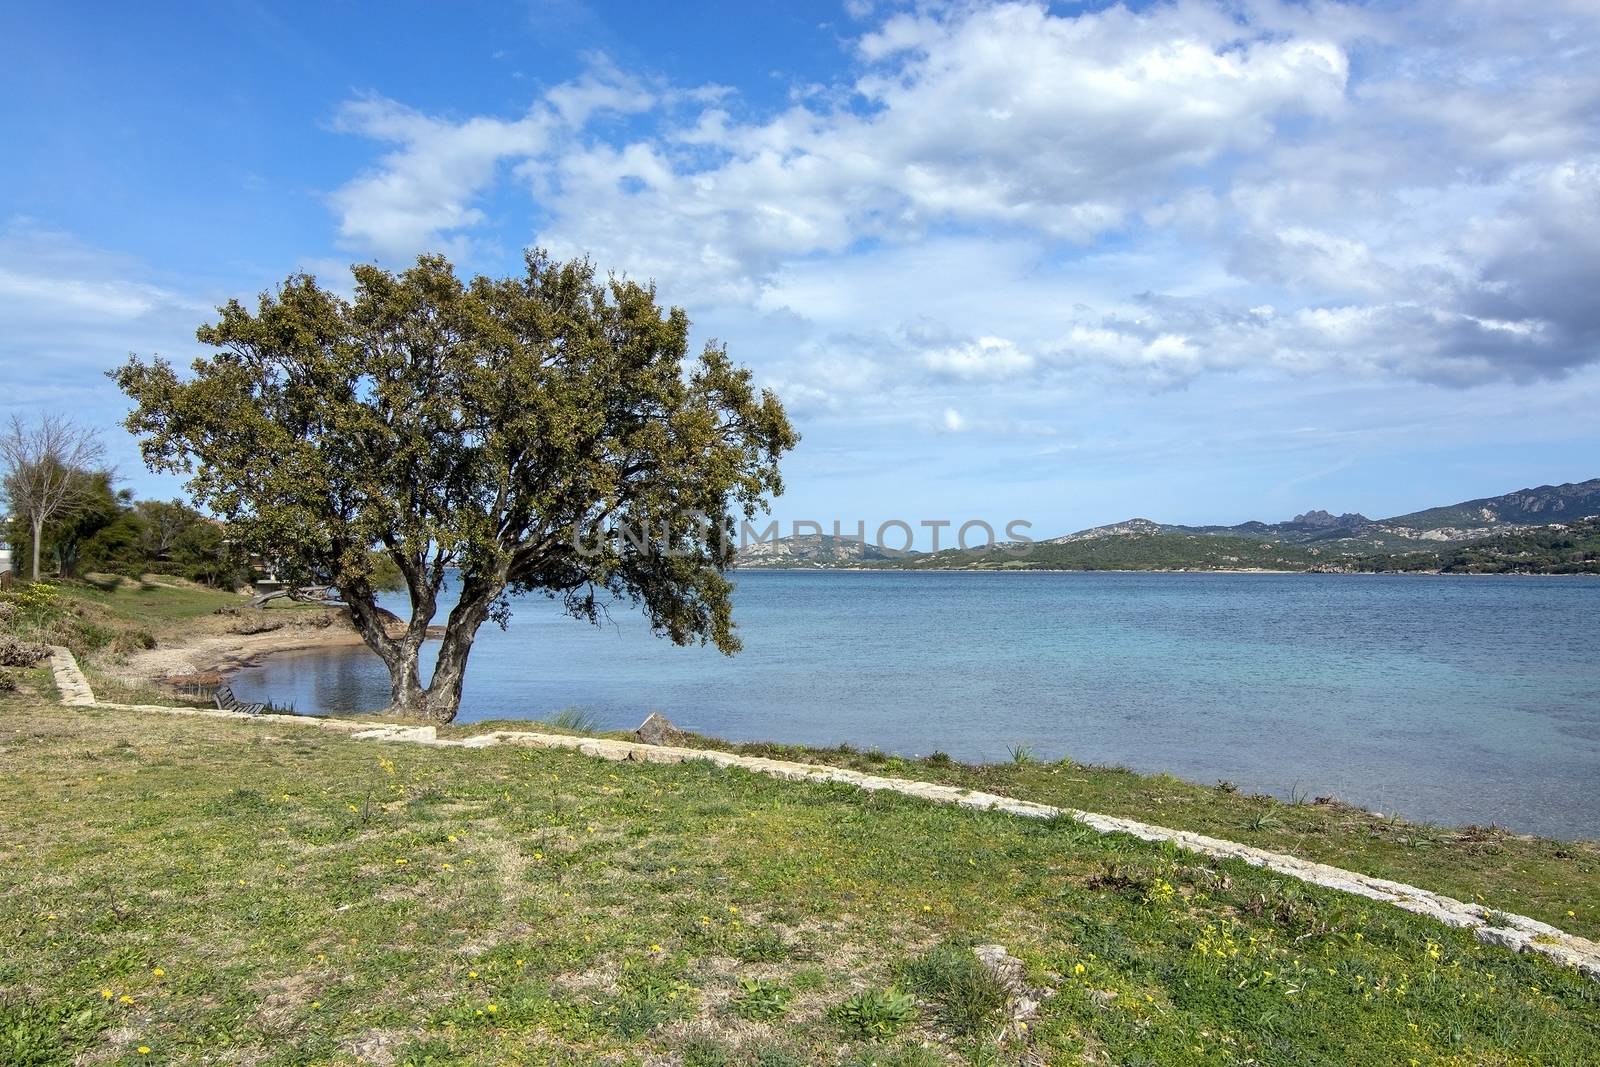 Landscape with tree and sandy beach in Sardinia by ArtesiaWells